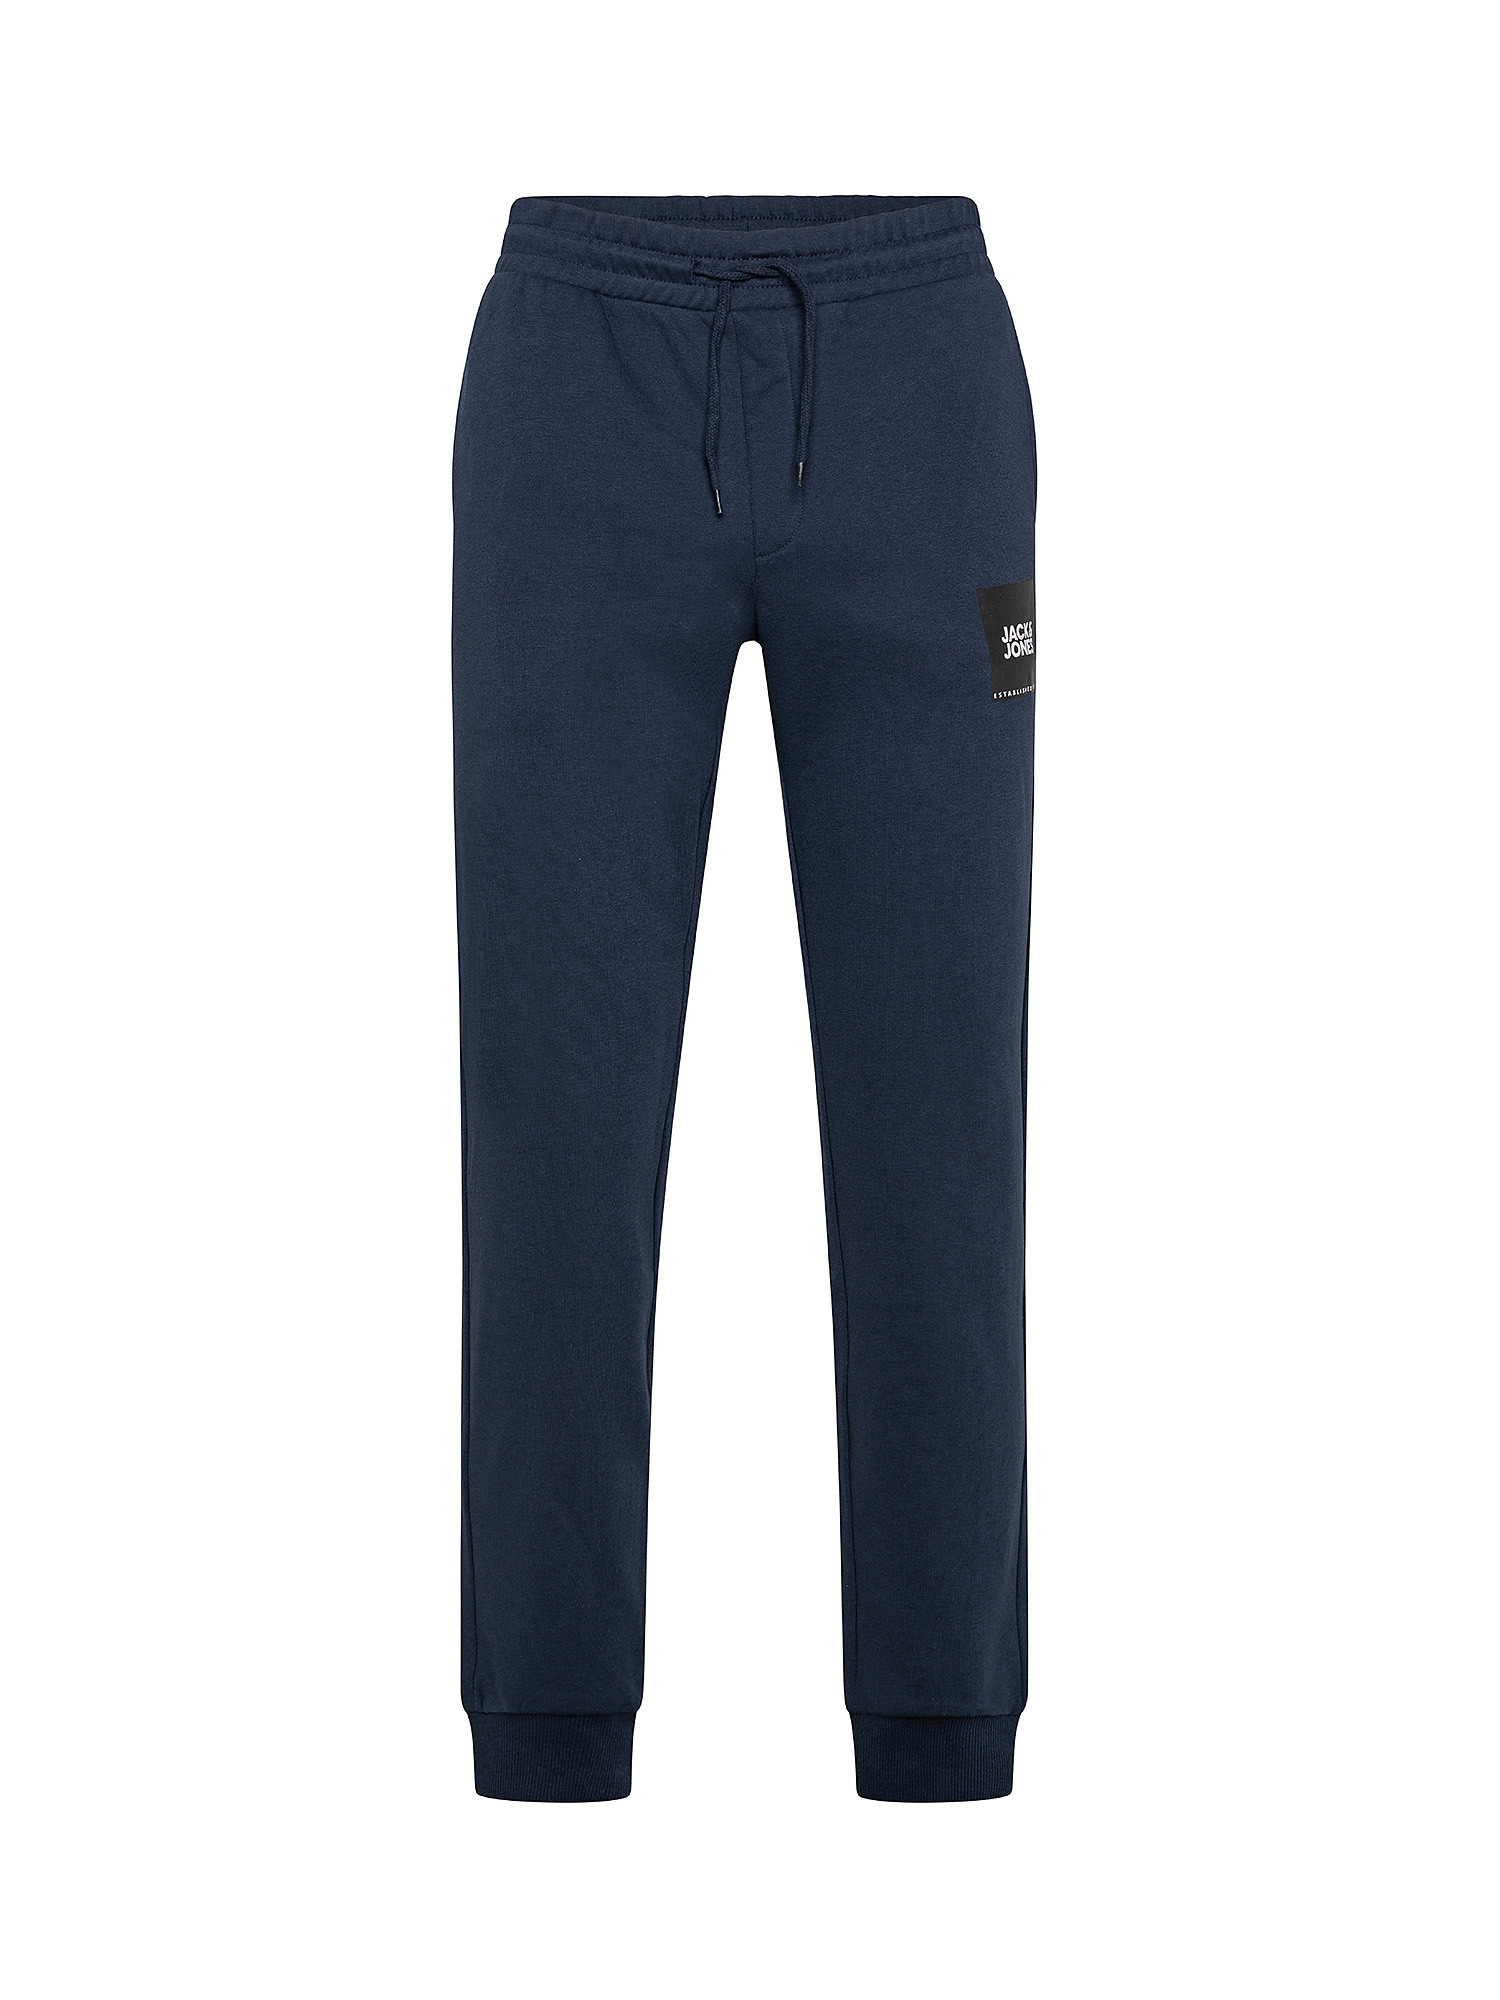 Sweatpants in cotton, Blue, large image number 0